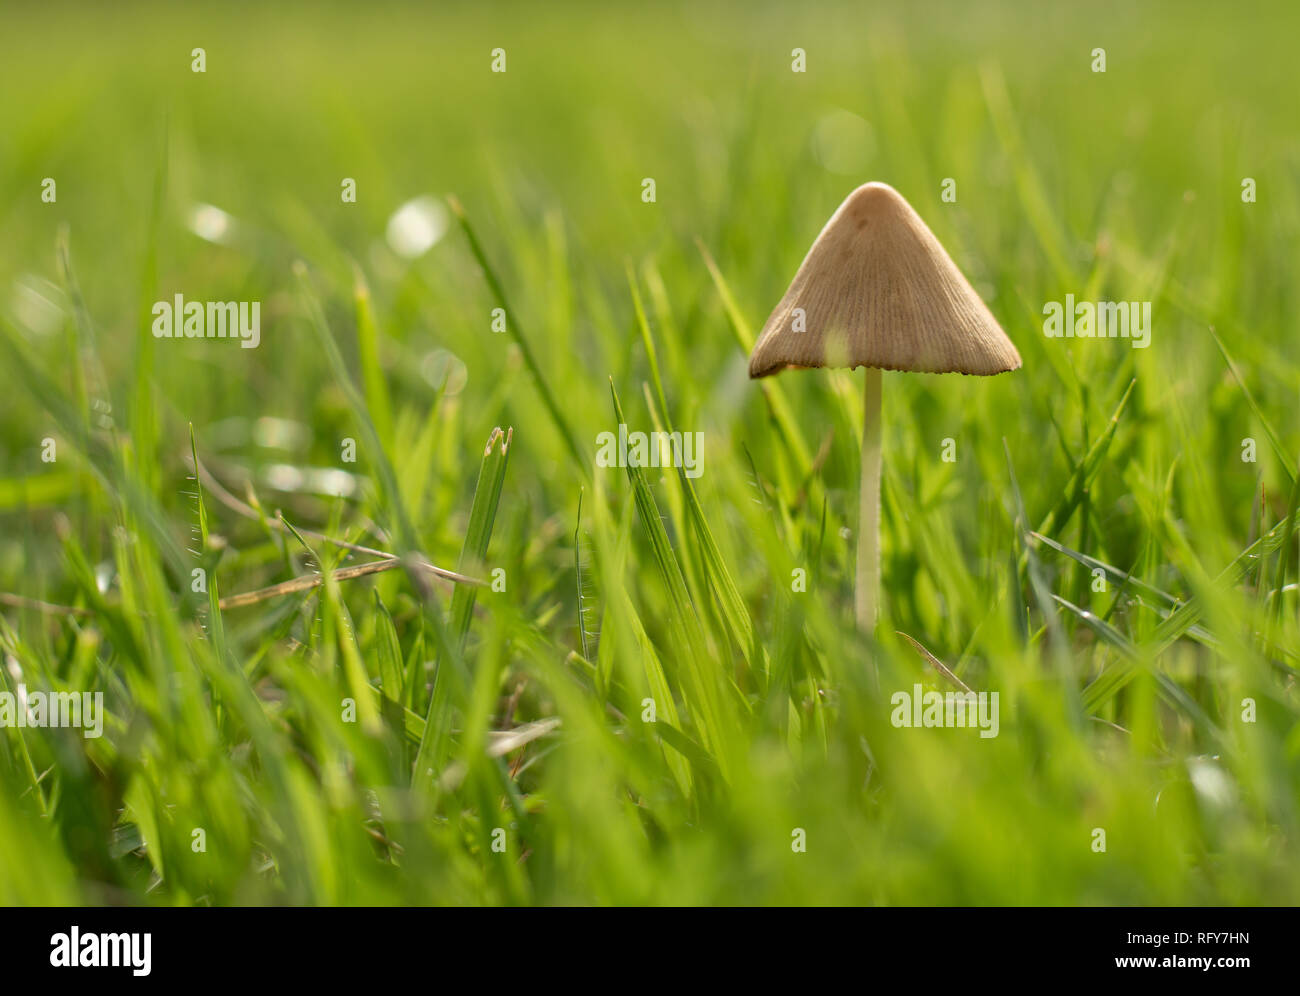 Brown mushrooms sprout among green grass Stock Photo